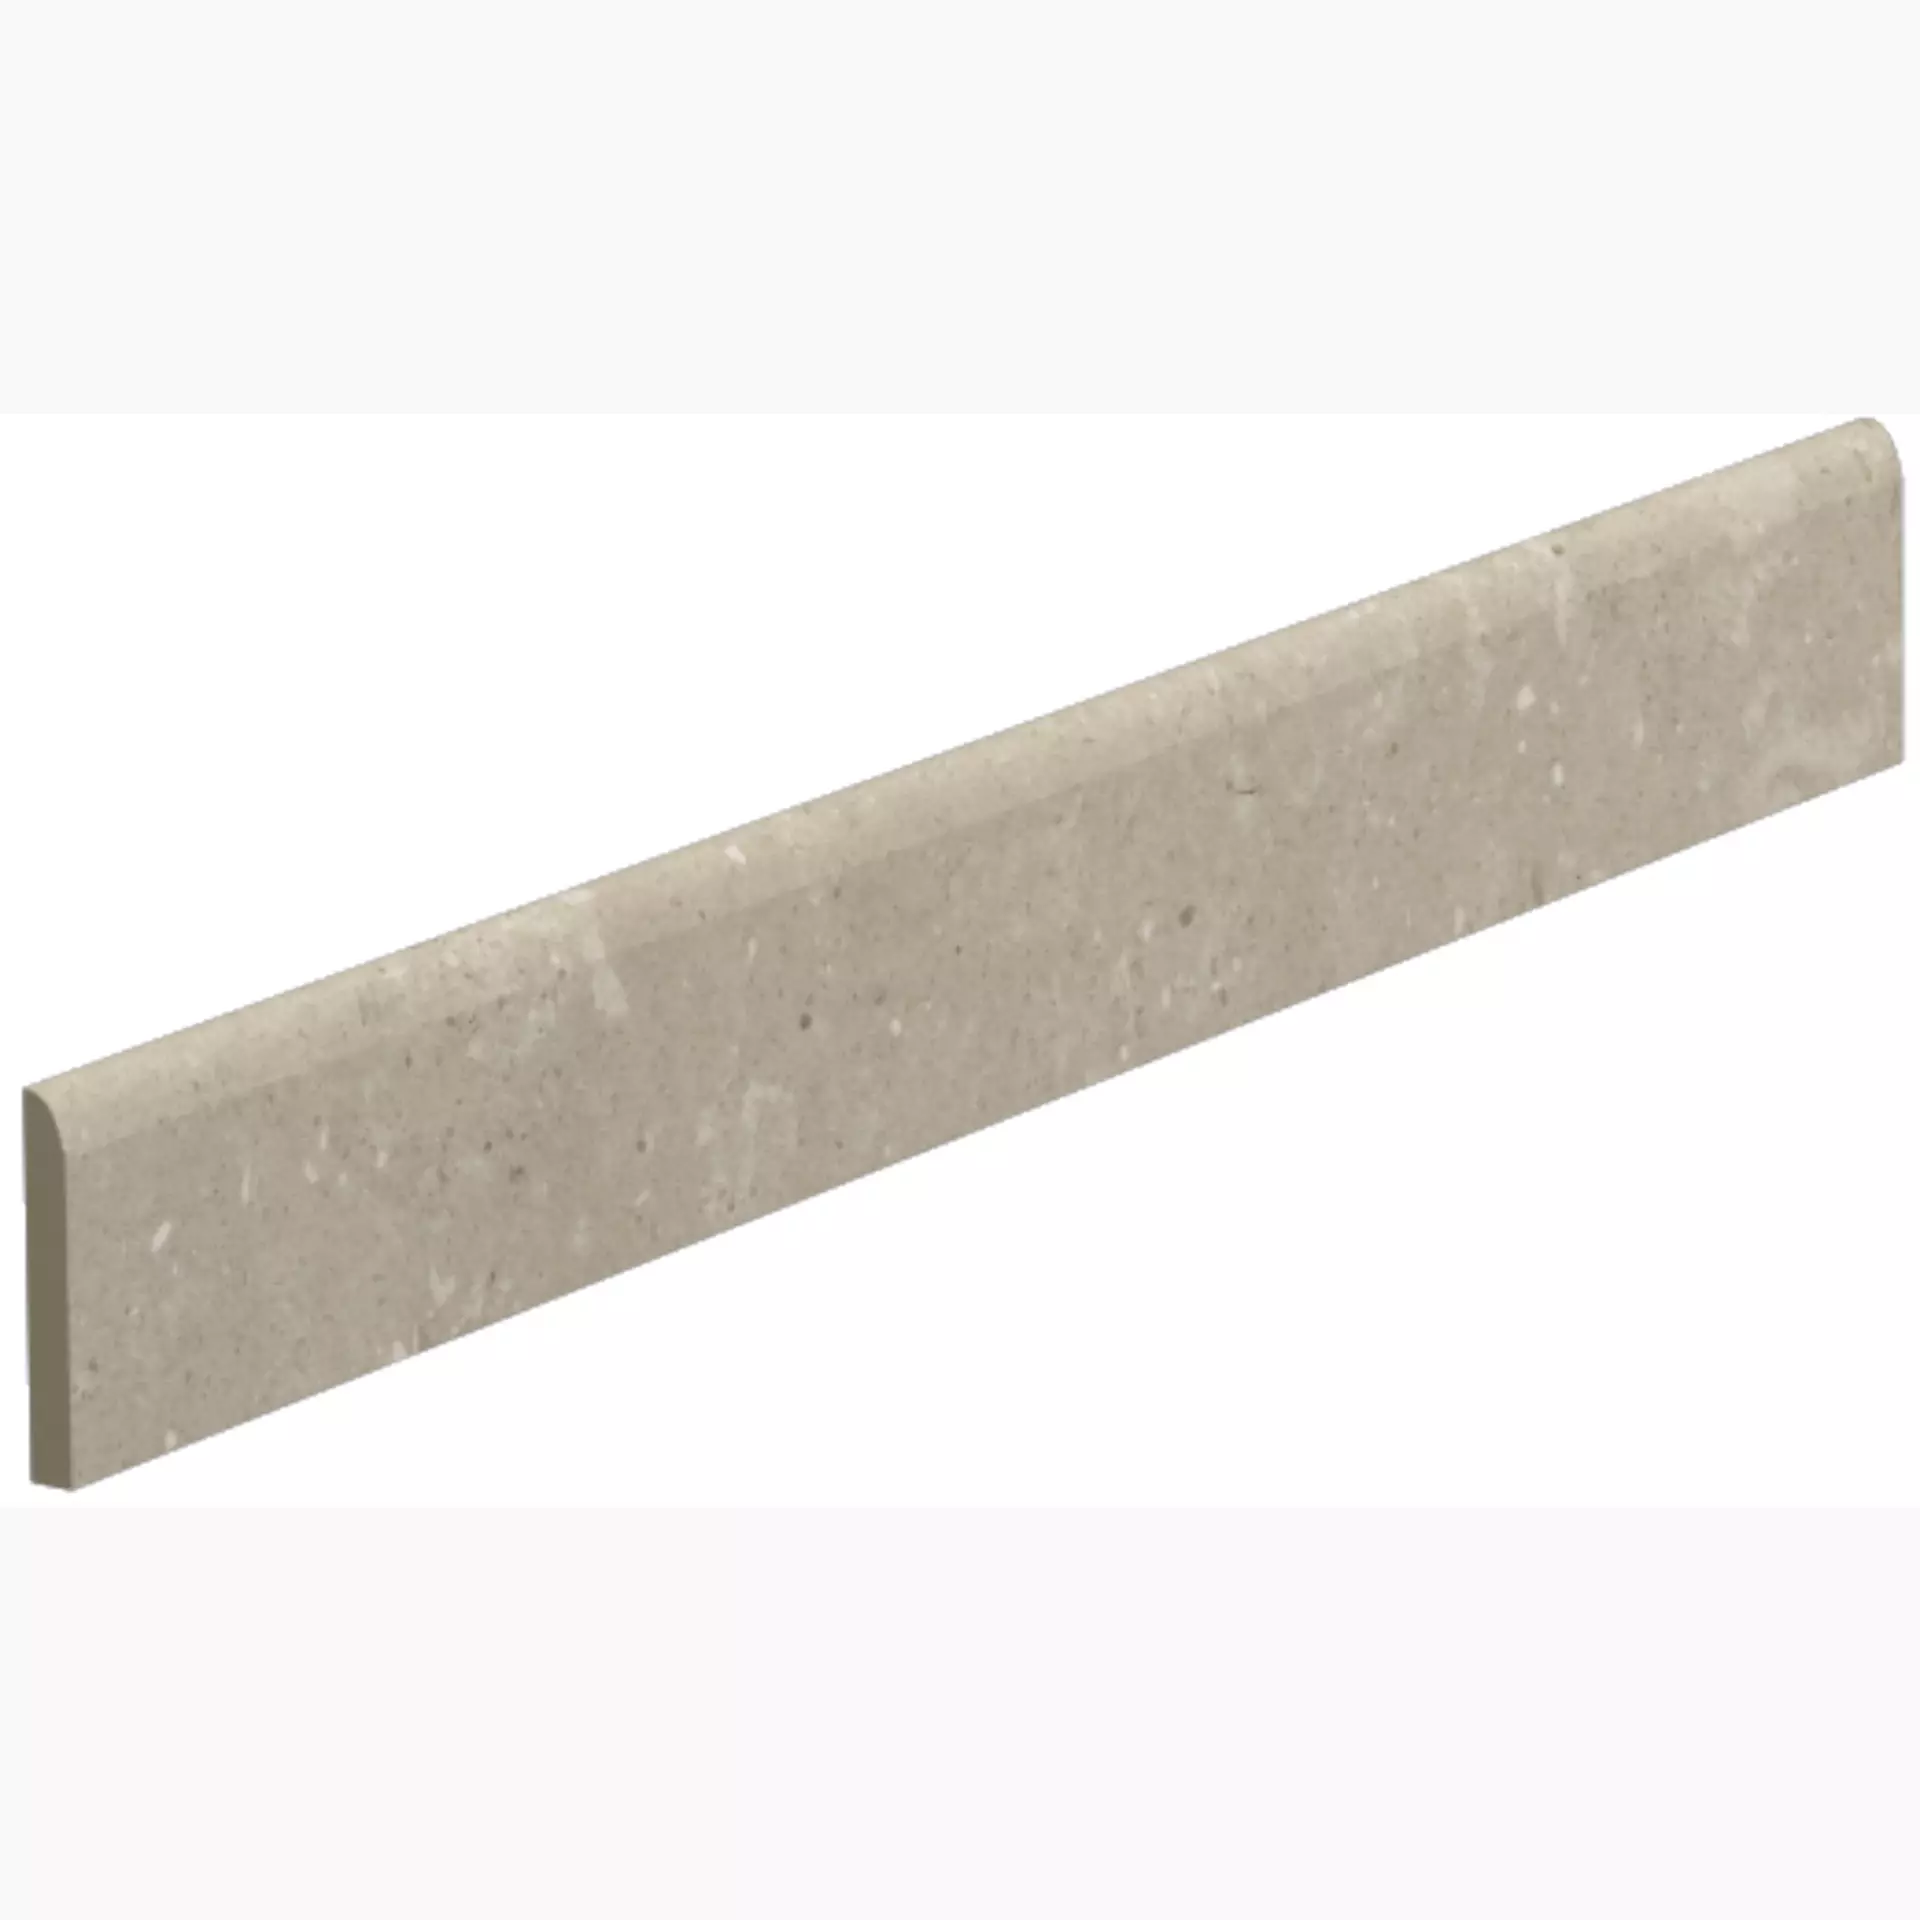 Del Conca Hwd Wild Greige Hwd11 Naturale Skirting board G0WD11R60 7,5x60cm rectified 8,5mm